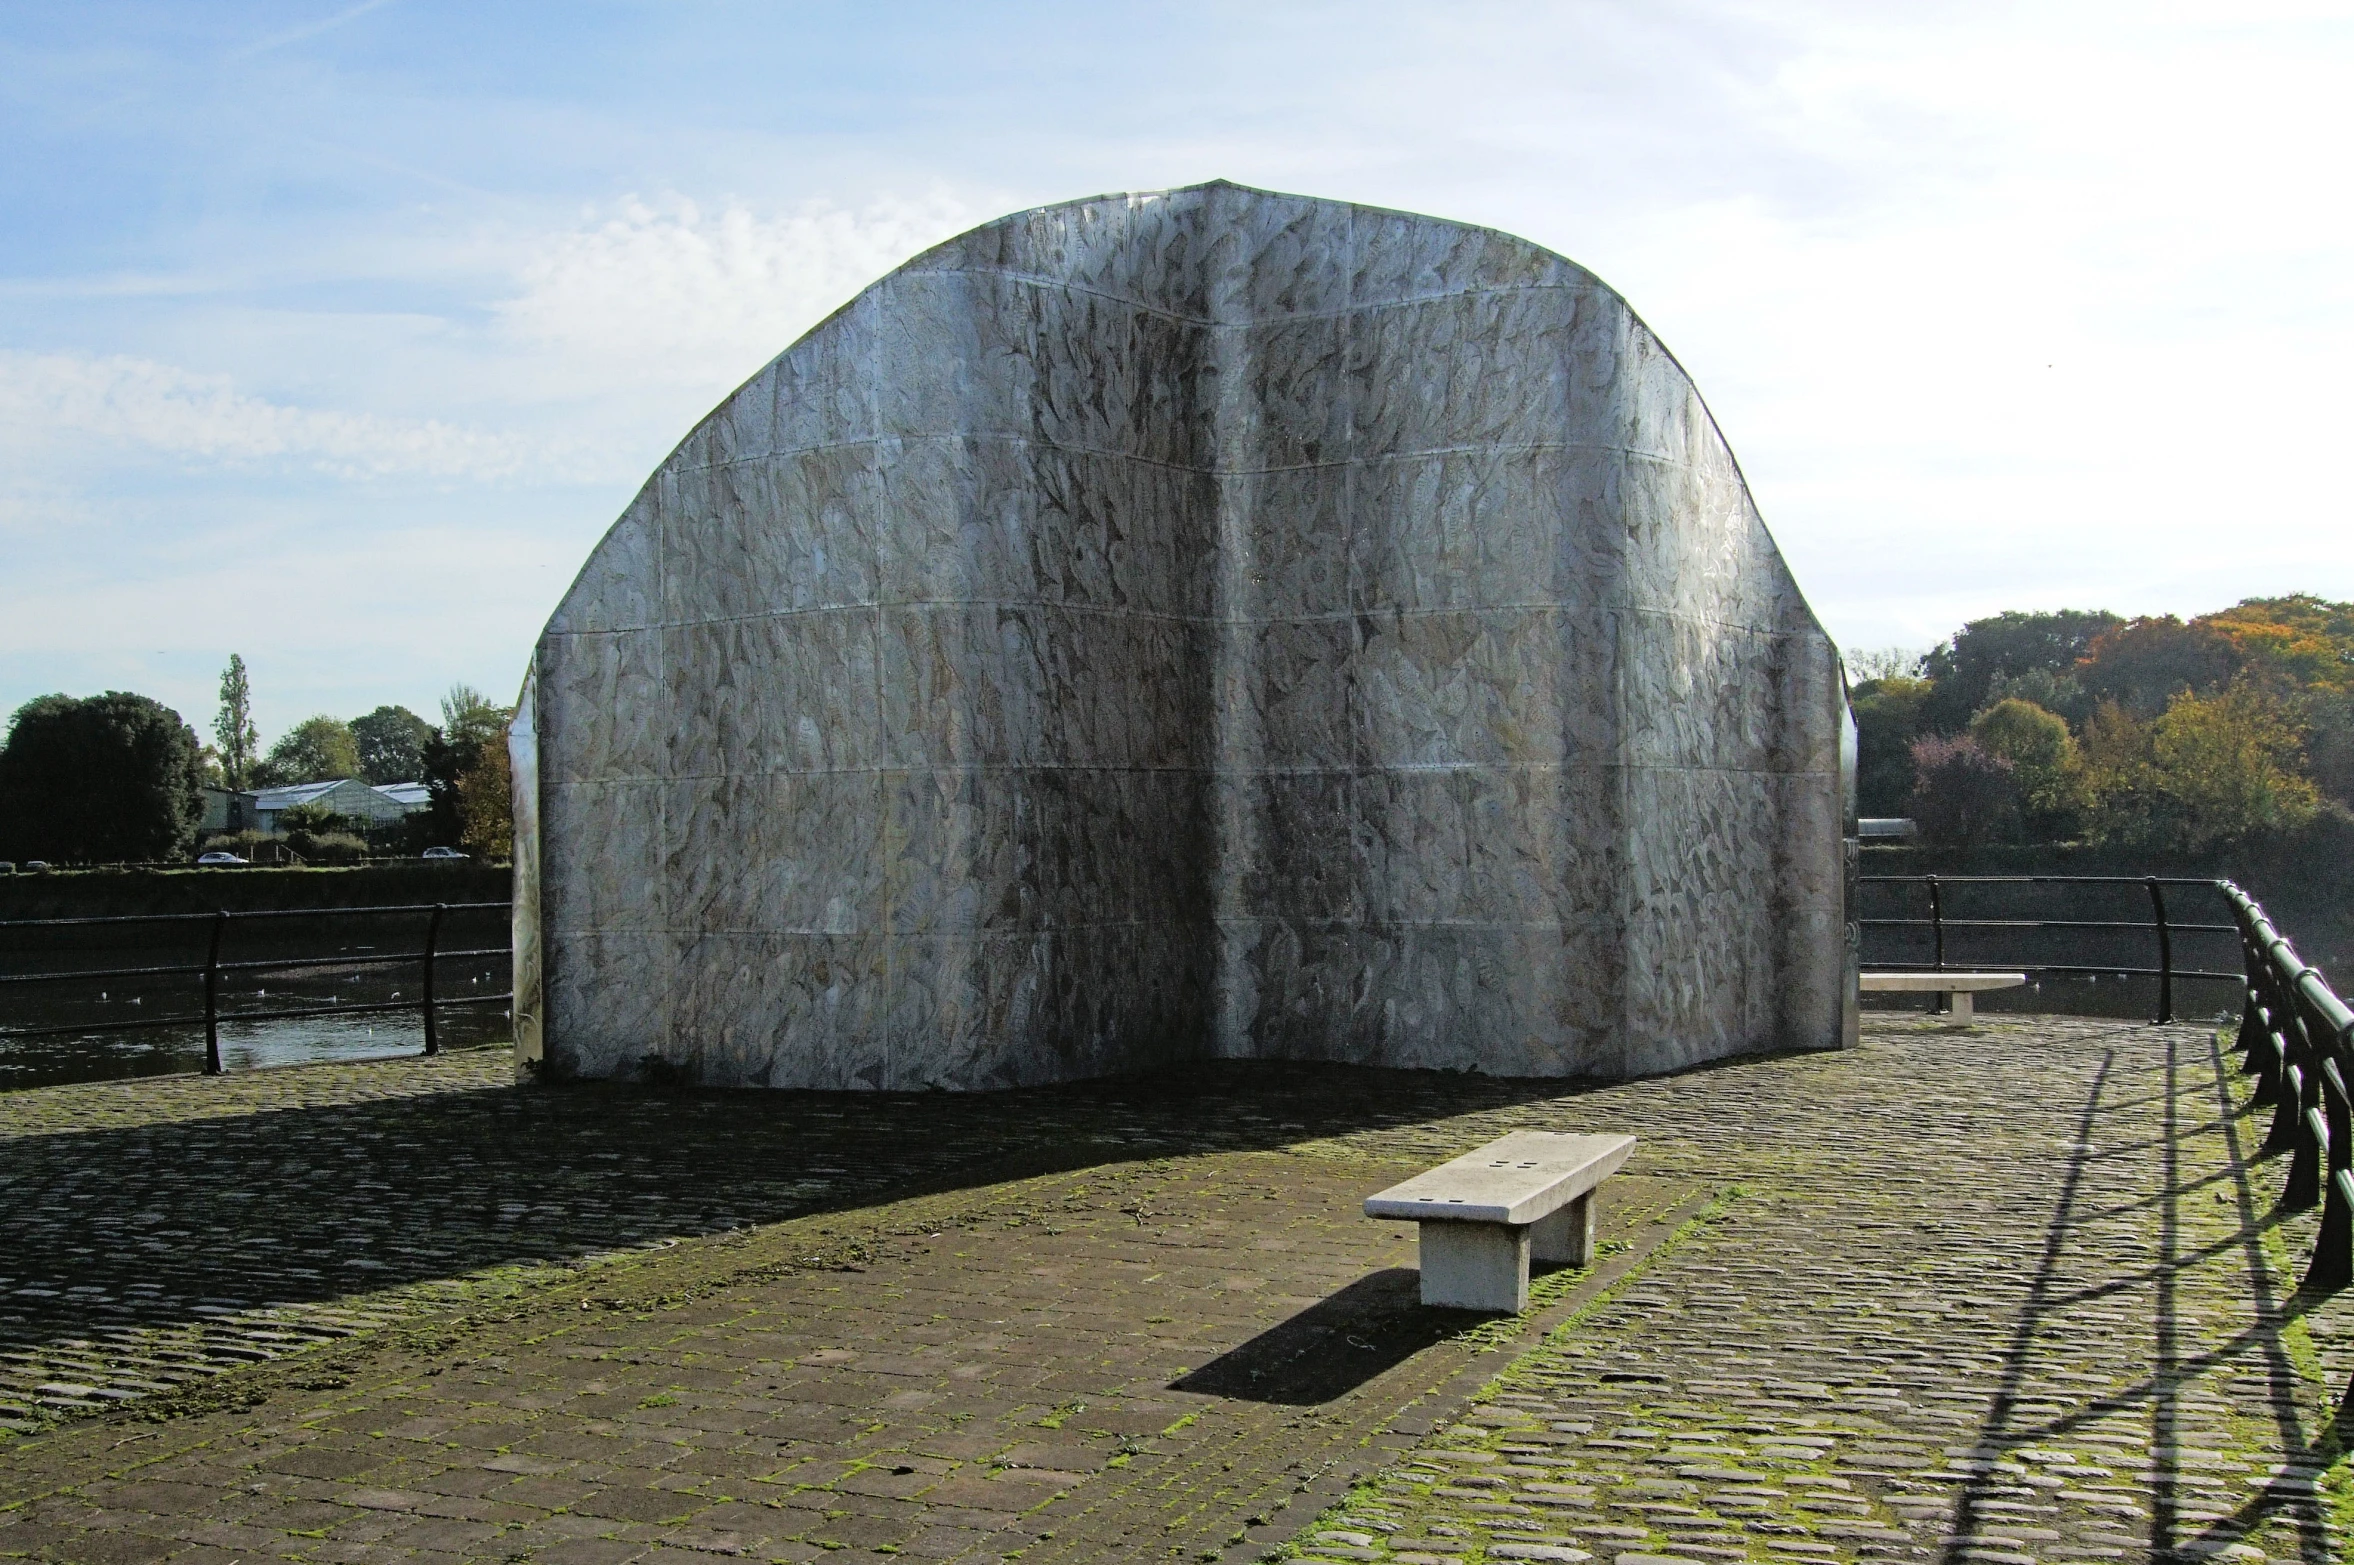 a large metal structure sitting in the middle of an empty field